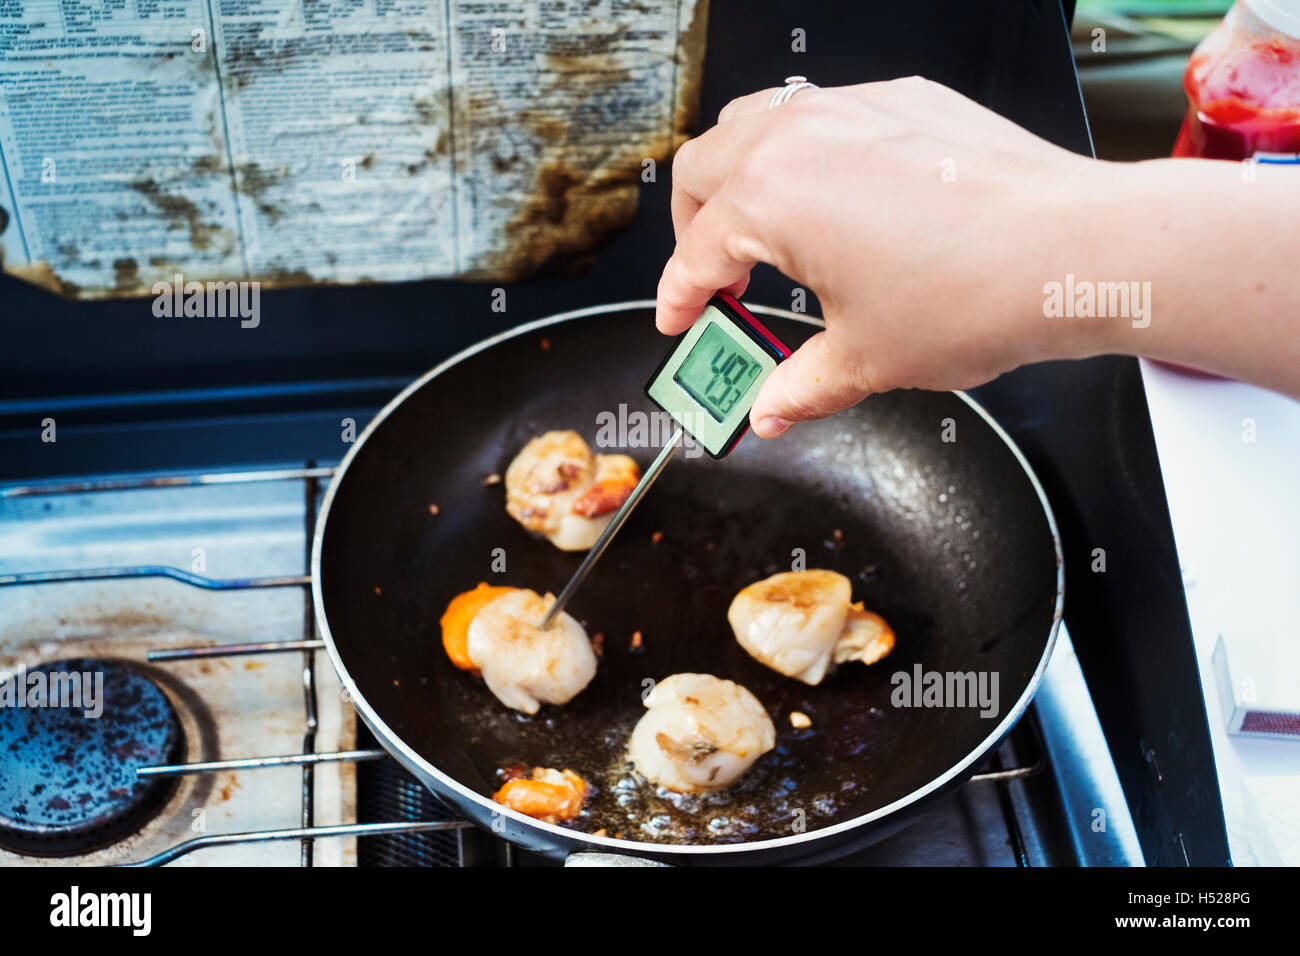 Woman measuring the temperature of a scallop in a frying pan with